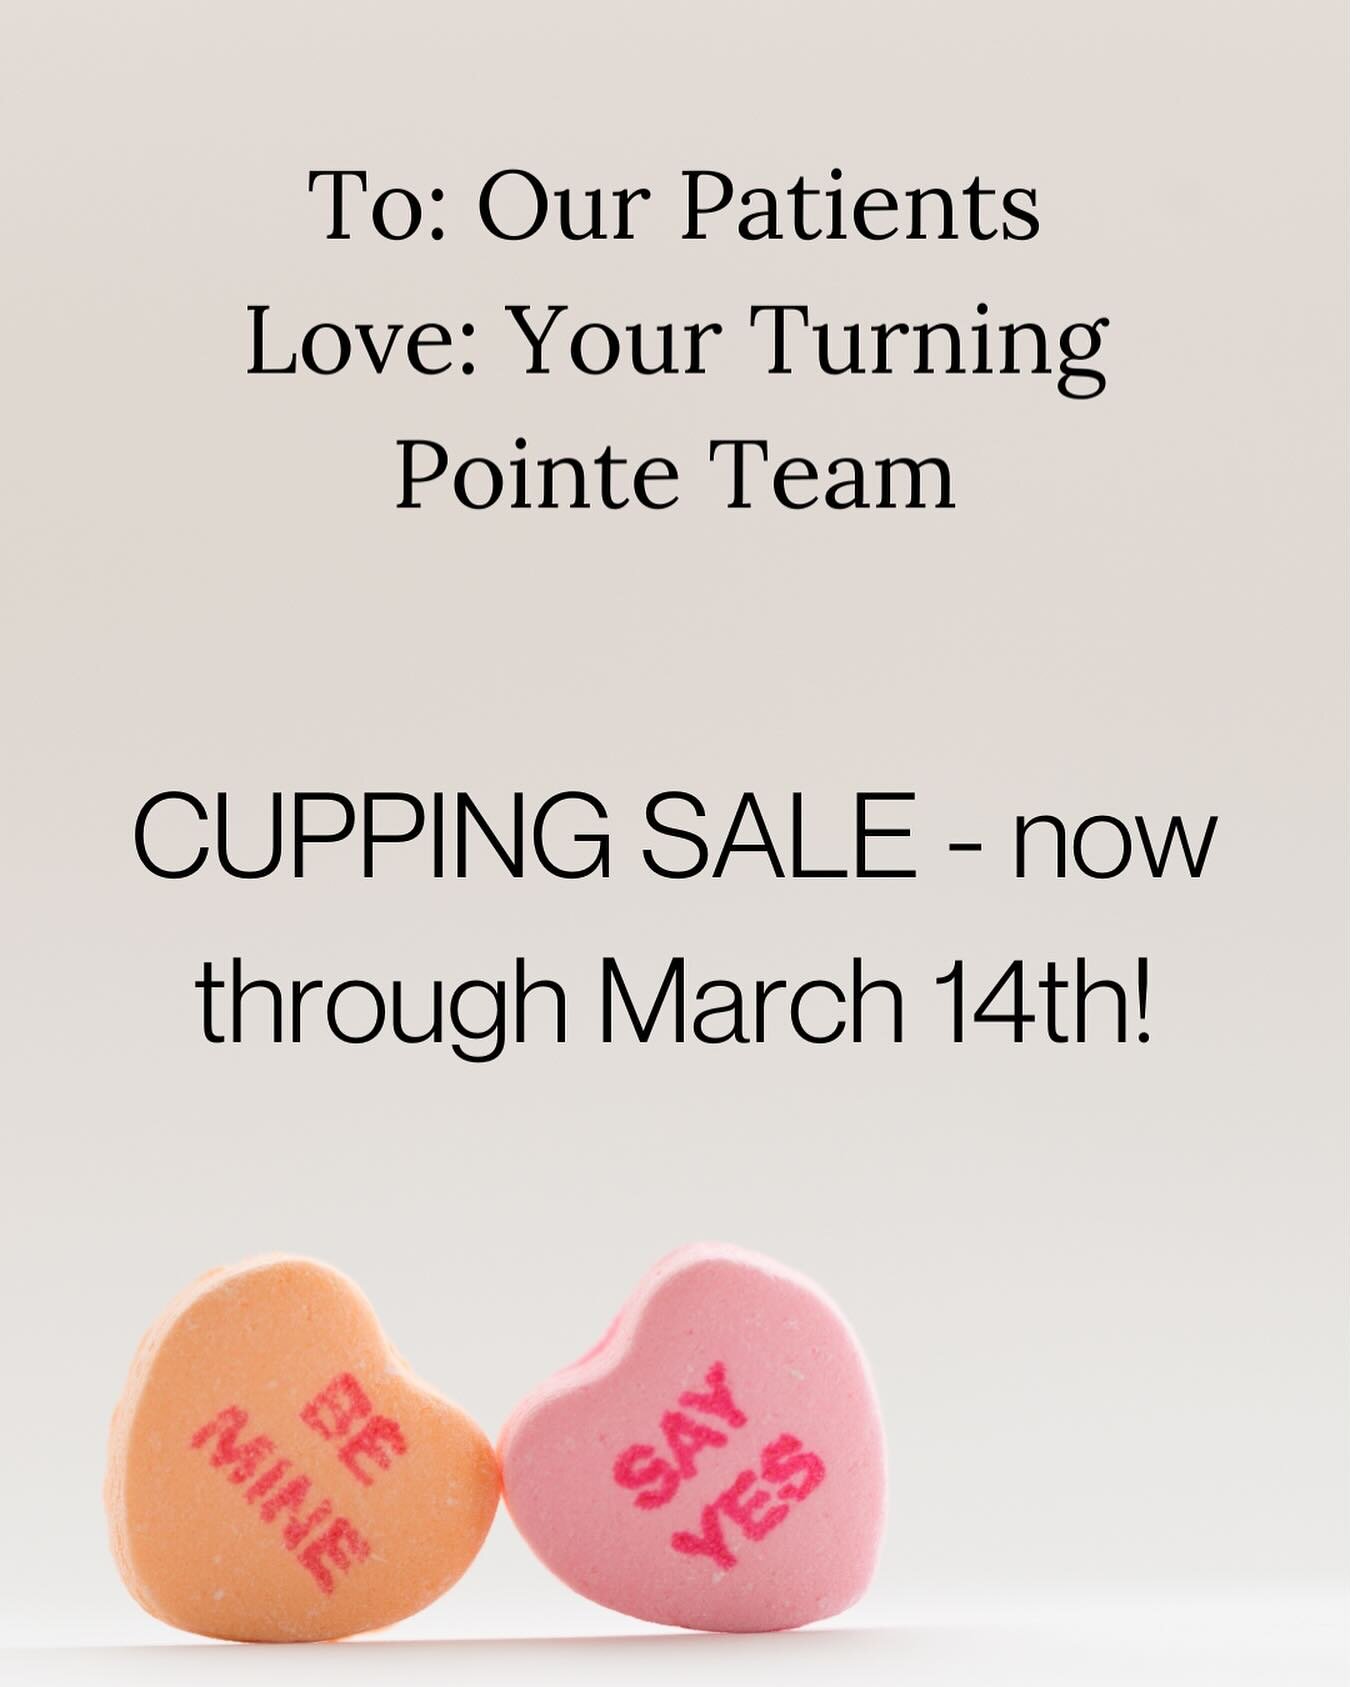 We love being part of your care team! To show our appreciation, we&rsquo;re offering discounted cupping therapy sessions from February 14 - March 14. *

❤️⚪️⚪️⚪️⚪️❤️

CUPPING SALE
$15 OFF New Patient Cupping Session

$10 OFF Follow-up Cupping Session